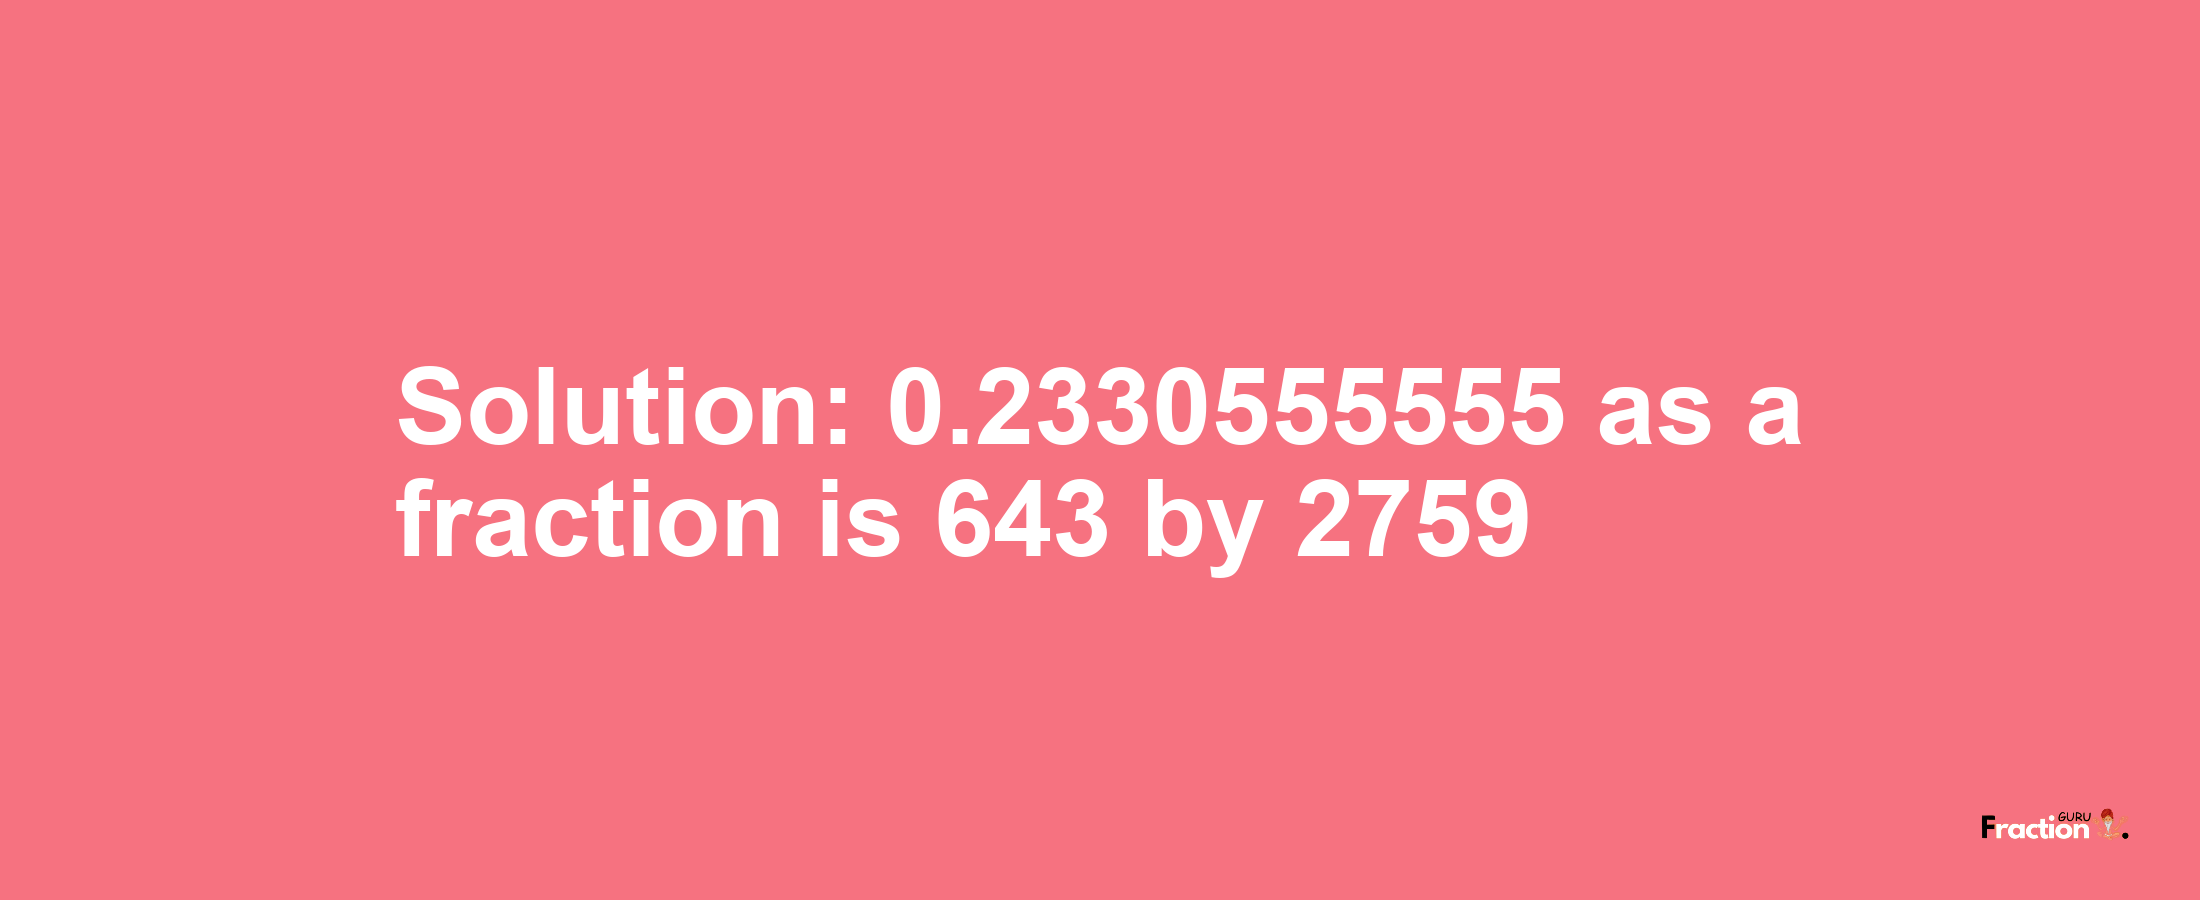 Solution:0.2330555555 as a fraction is 643/2759